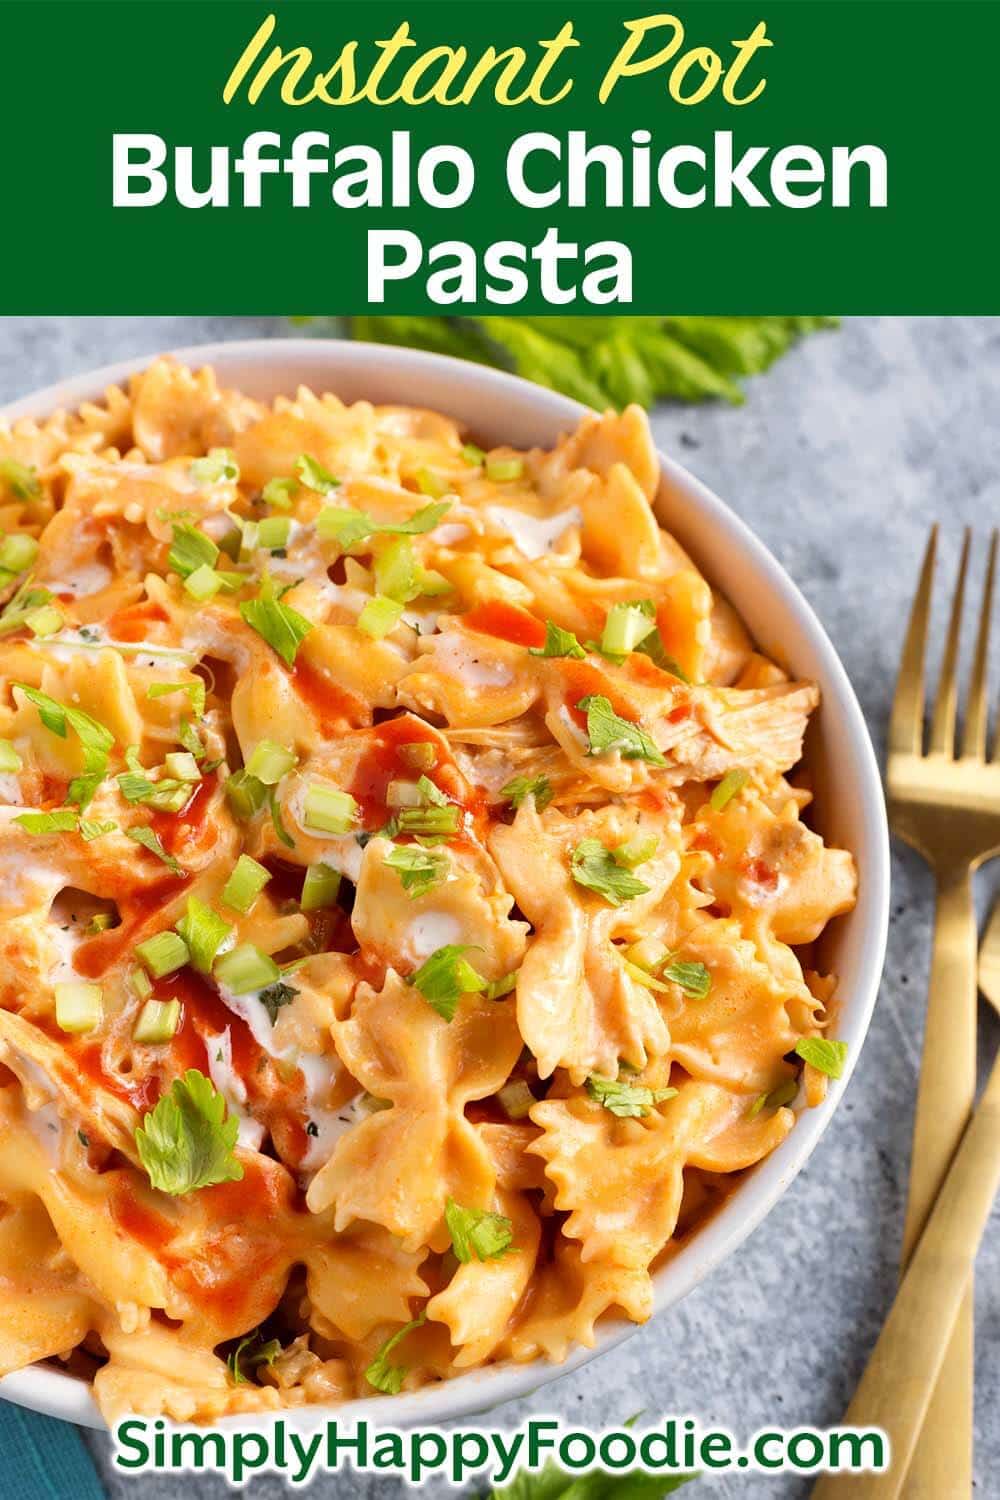 Instant Pot Buffalo Chicken Pasta is zesty, rich, and delicious! The flavor is like that of Buffalo Chicken Wings, only in a bowl of creamy, cheesy pasta! Pressure cooker Buffalo Chicken Pasta is easy to make, and is great for a weeknight meal or a Game Day party! Instant Pot recipes by simplyhappyfoodie.com #instantpotbuffalochickenpasta #pressurecookerbuffalochickenpasta